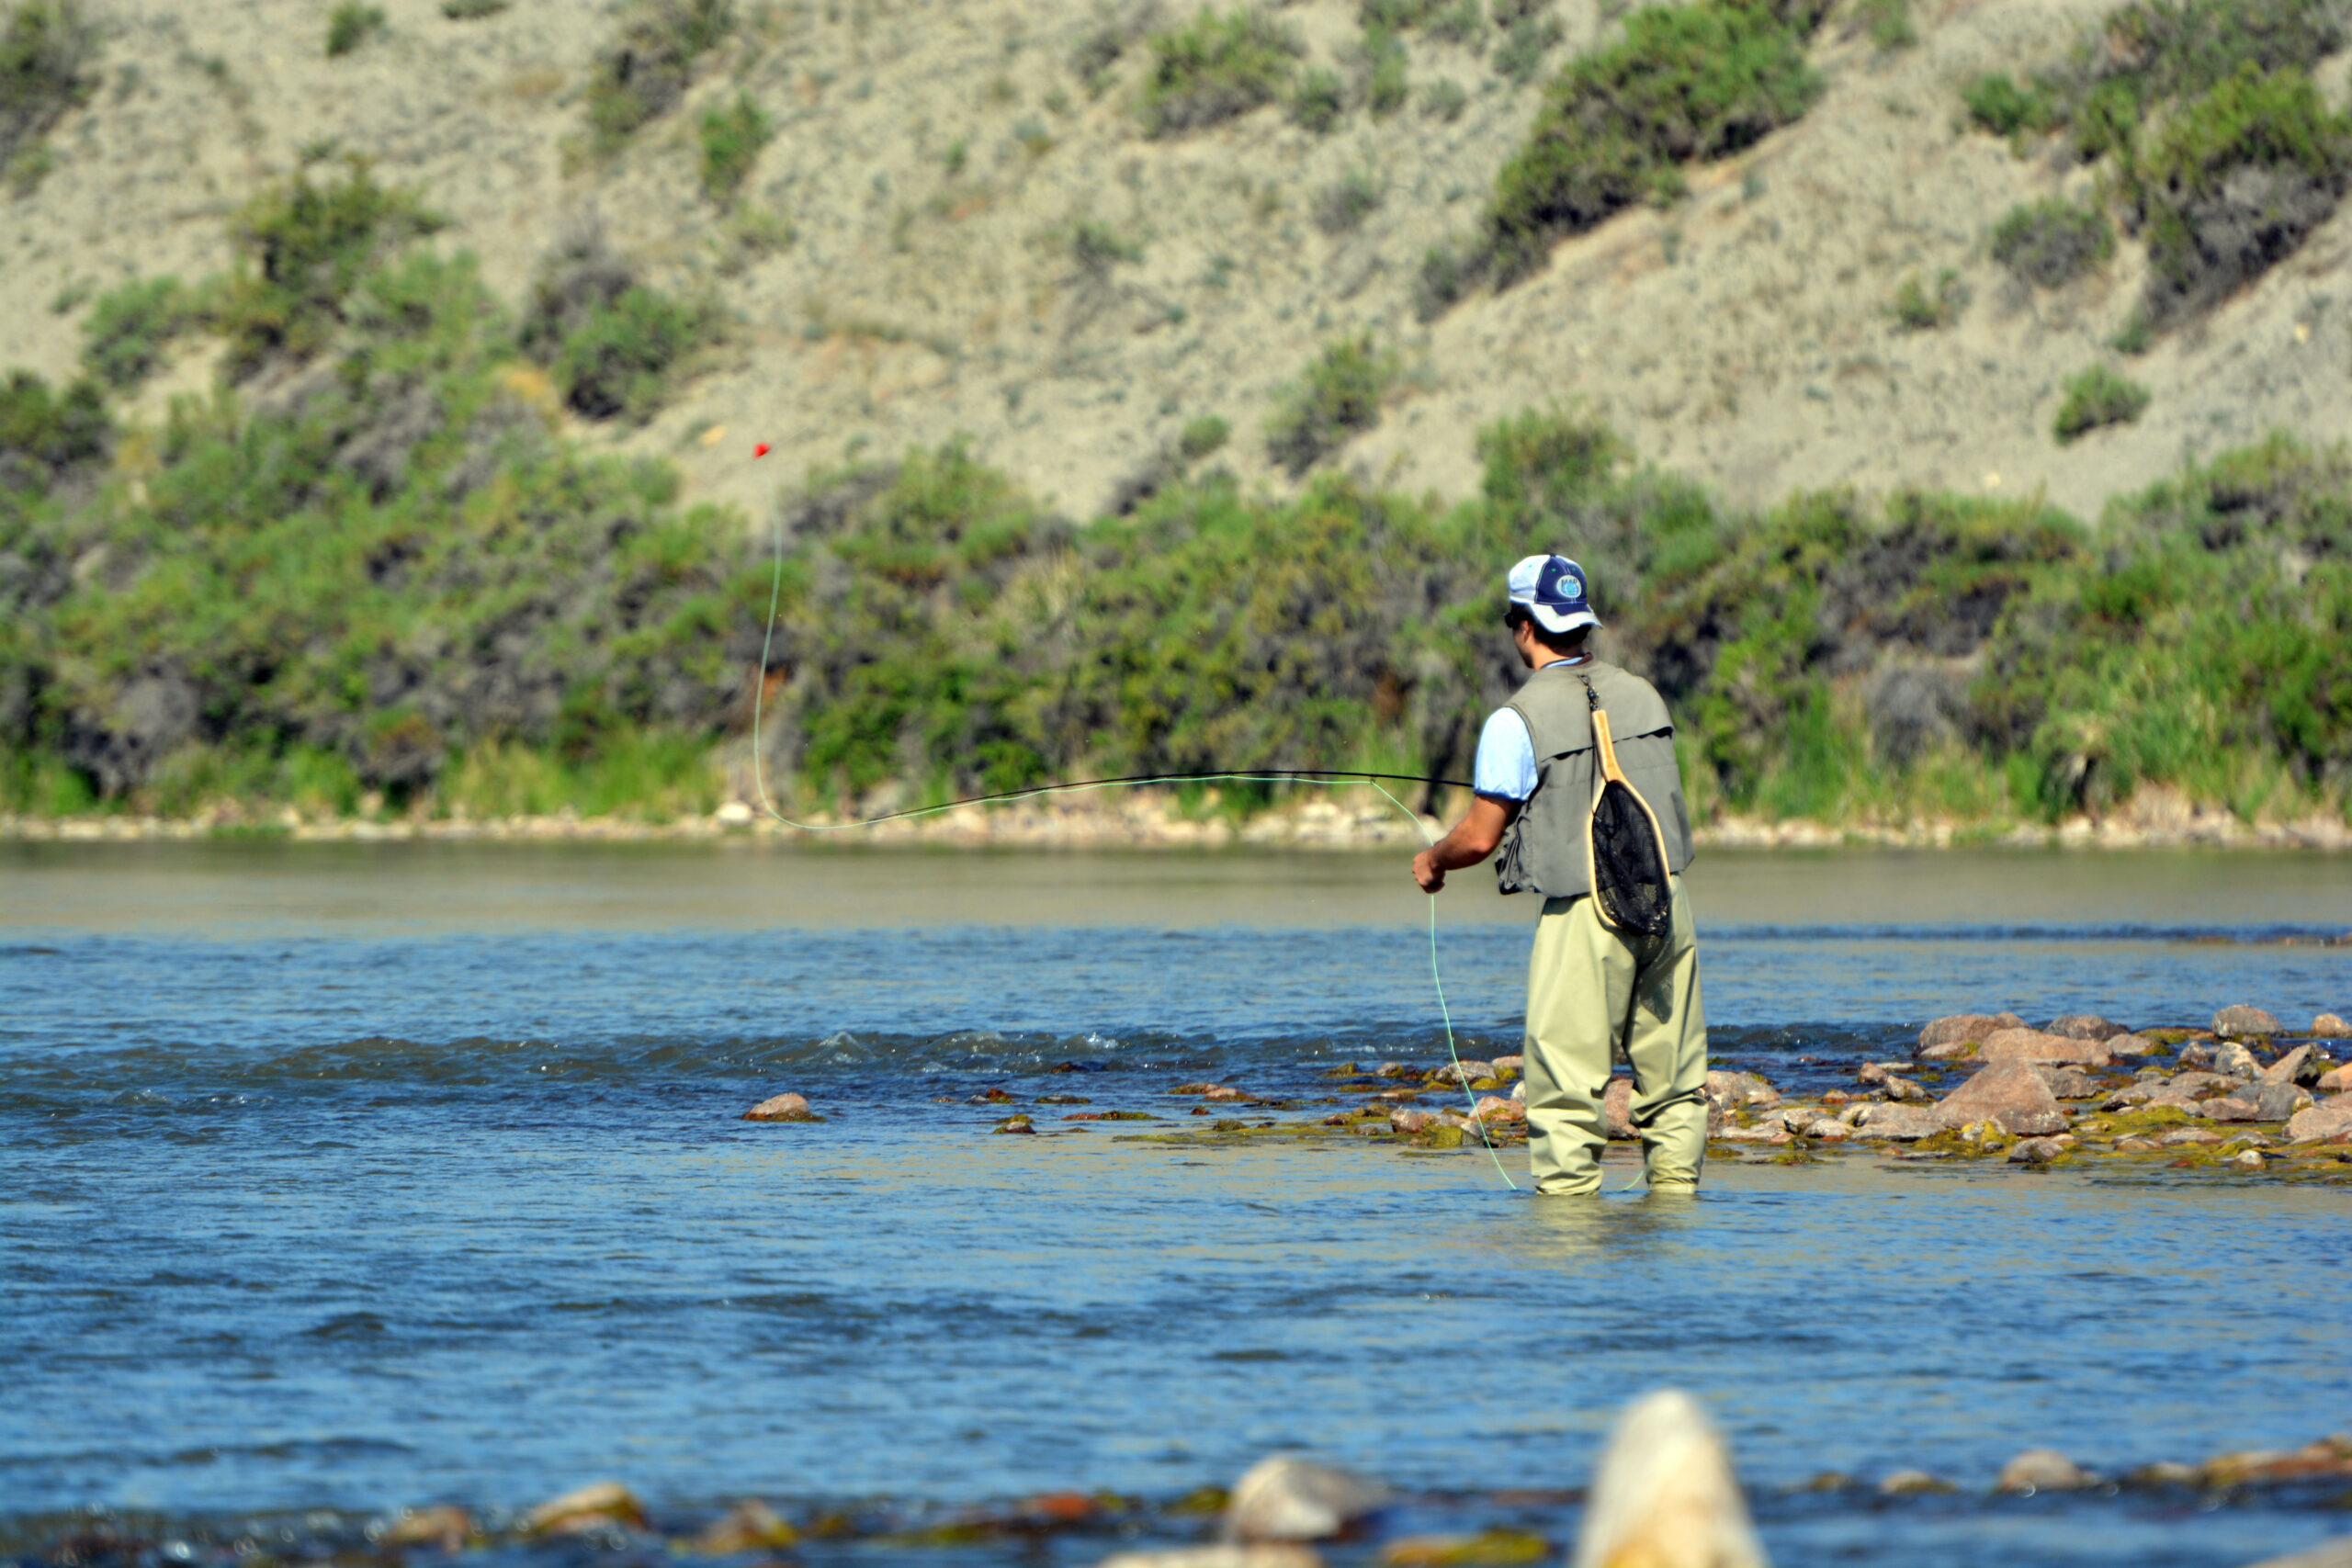 Trout fishing creates tourism and industry, which is also threatened by hot conditions.